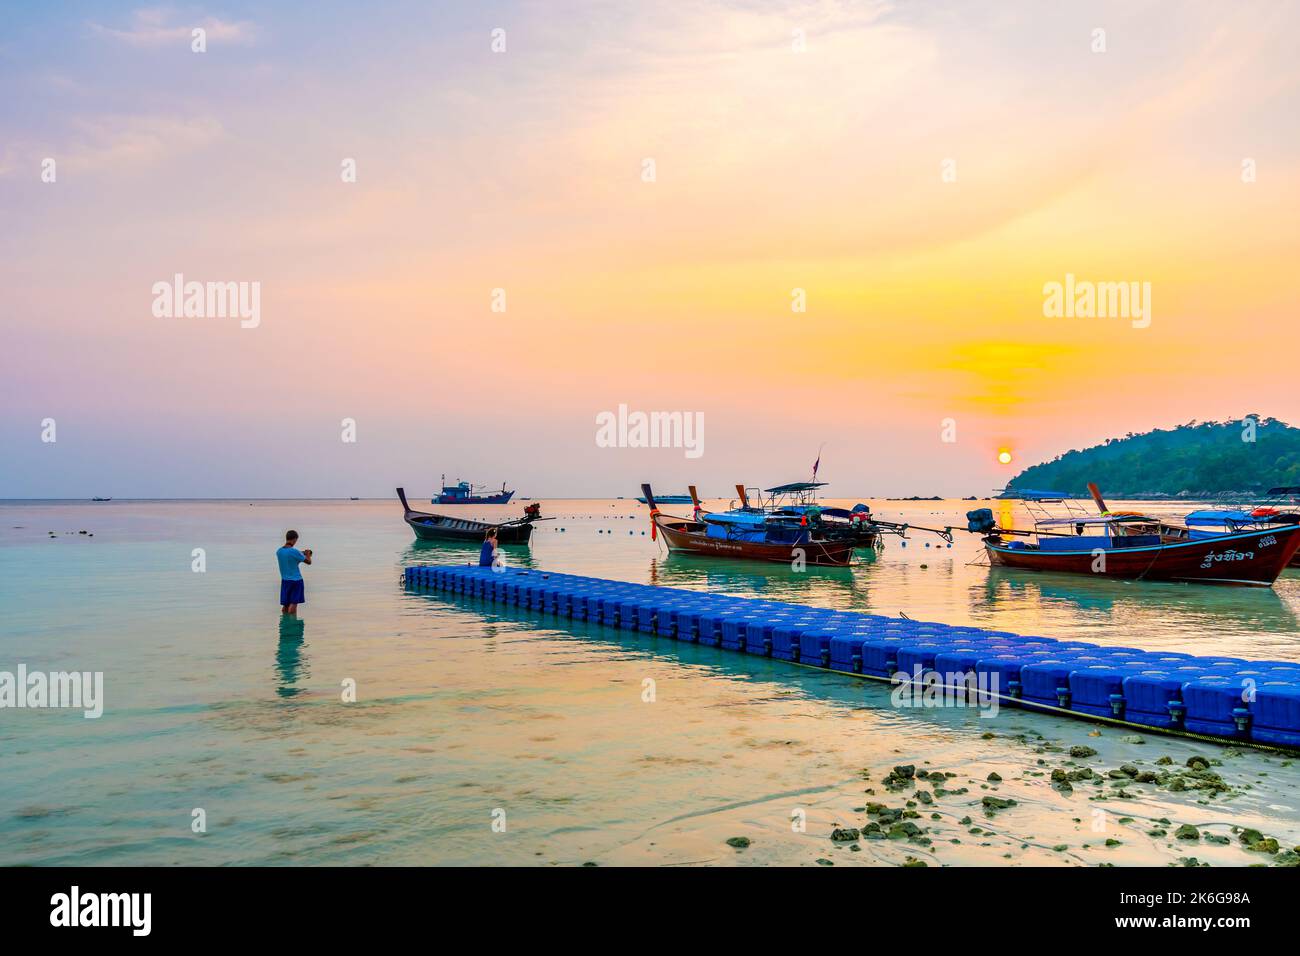 Koh Lipe, Thailand - 13.11.2019: Tourists are taking selfie photos during sunset at Ko Lipe island, Thailand. Beautiful and romantic time for photogra Stock Photo